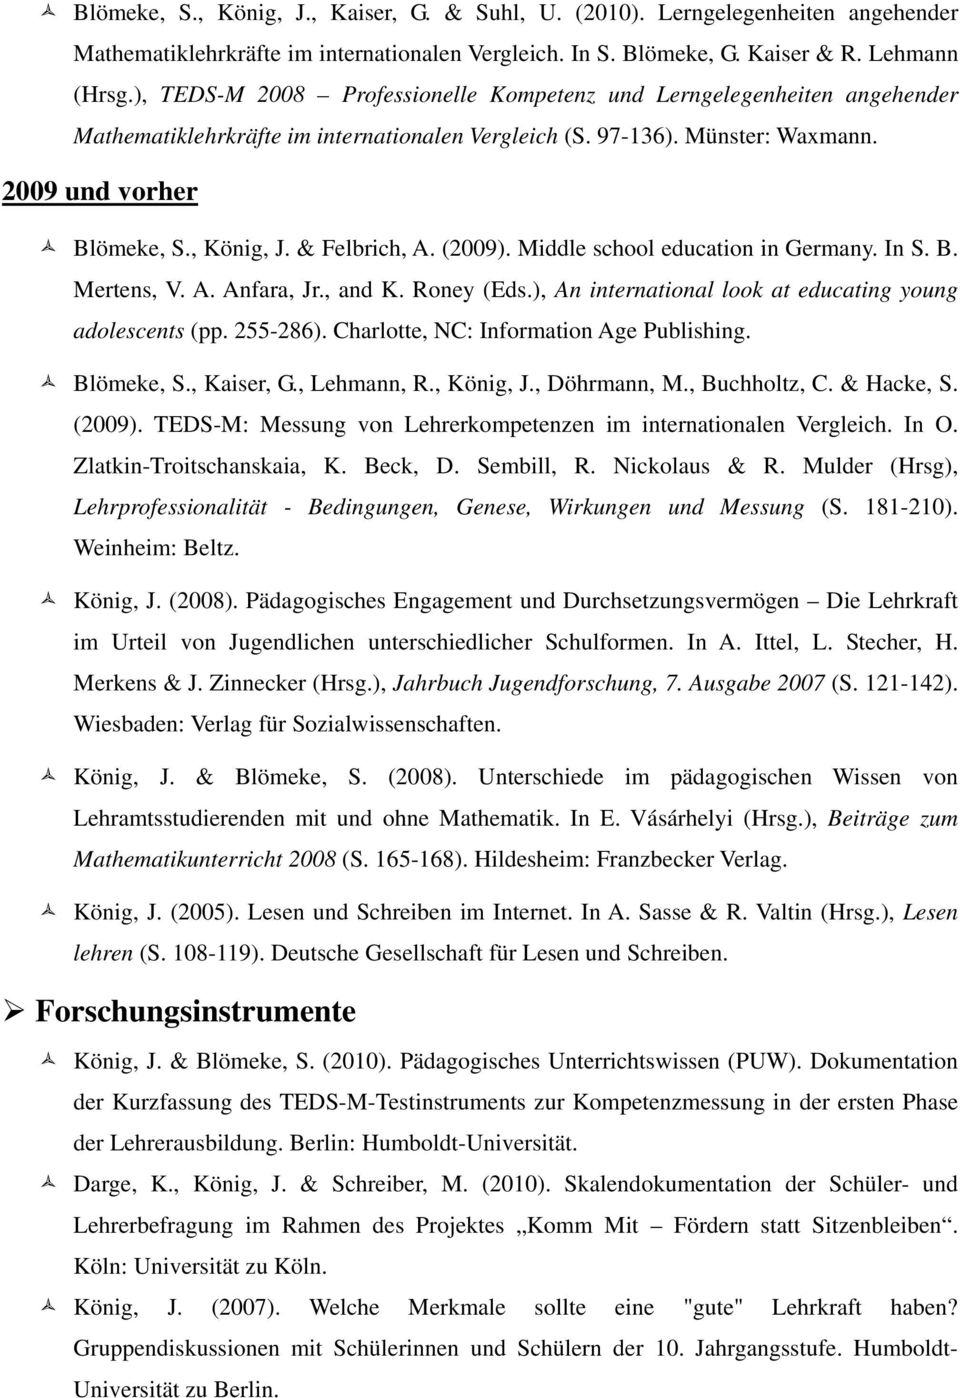 & Felbrich, A. (2009). Middle school education in Germany. In S. B. Mertens, V. A. Anfara, Jr., and K. Roney (Eds.), An international look at educating young adolescents (pp. 255-286).